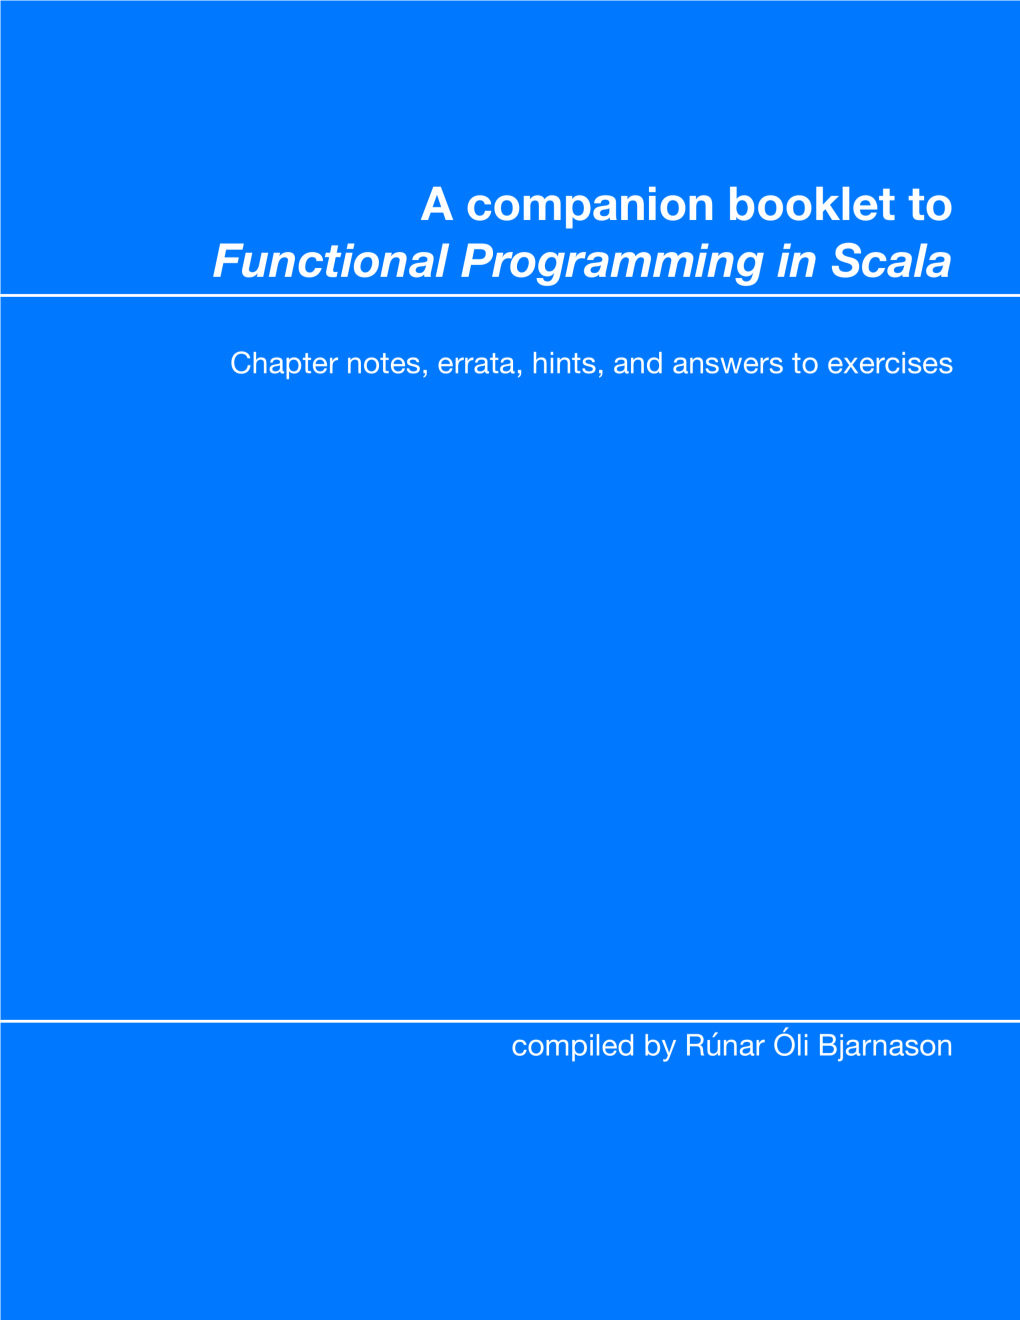 A Companion Booklet to "Functional Programming in Scala"